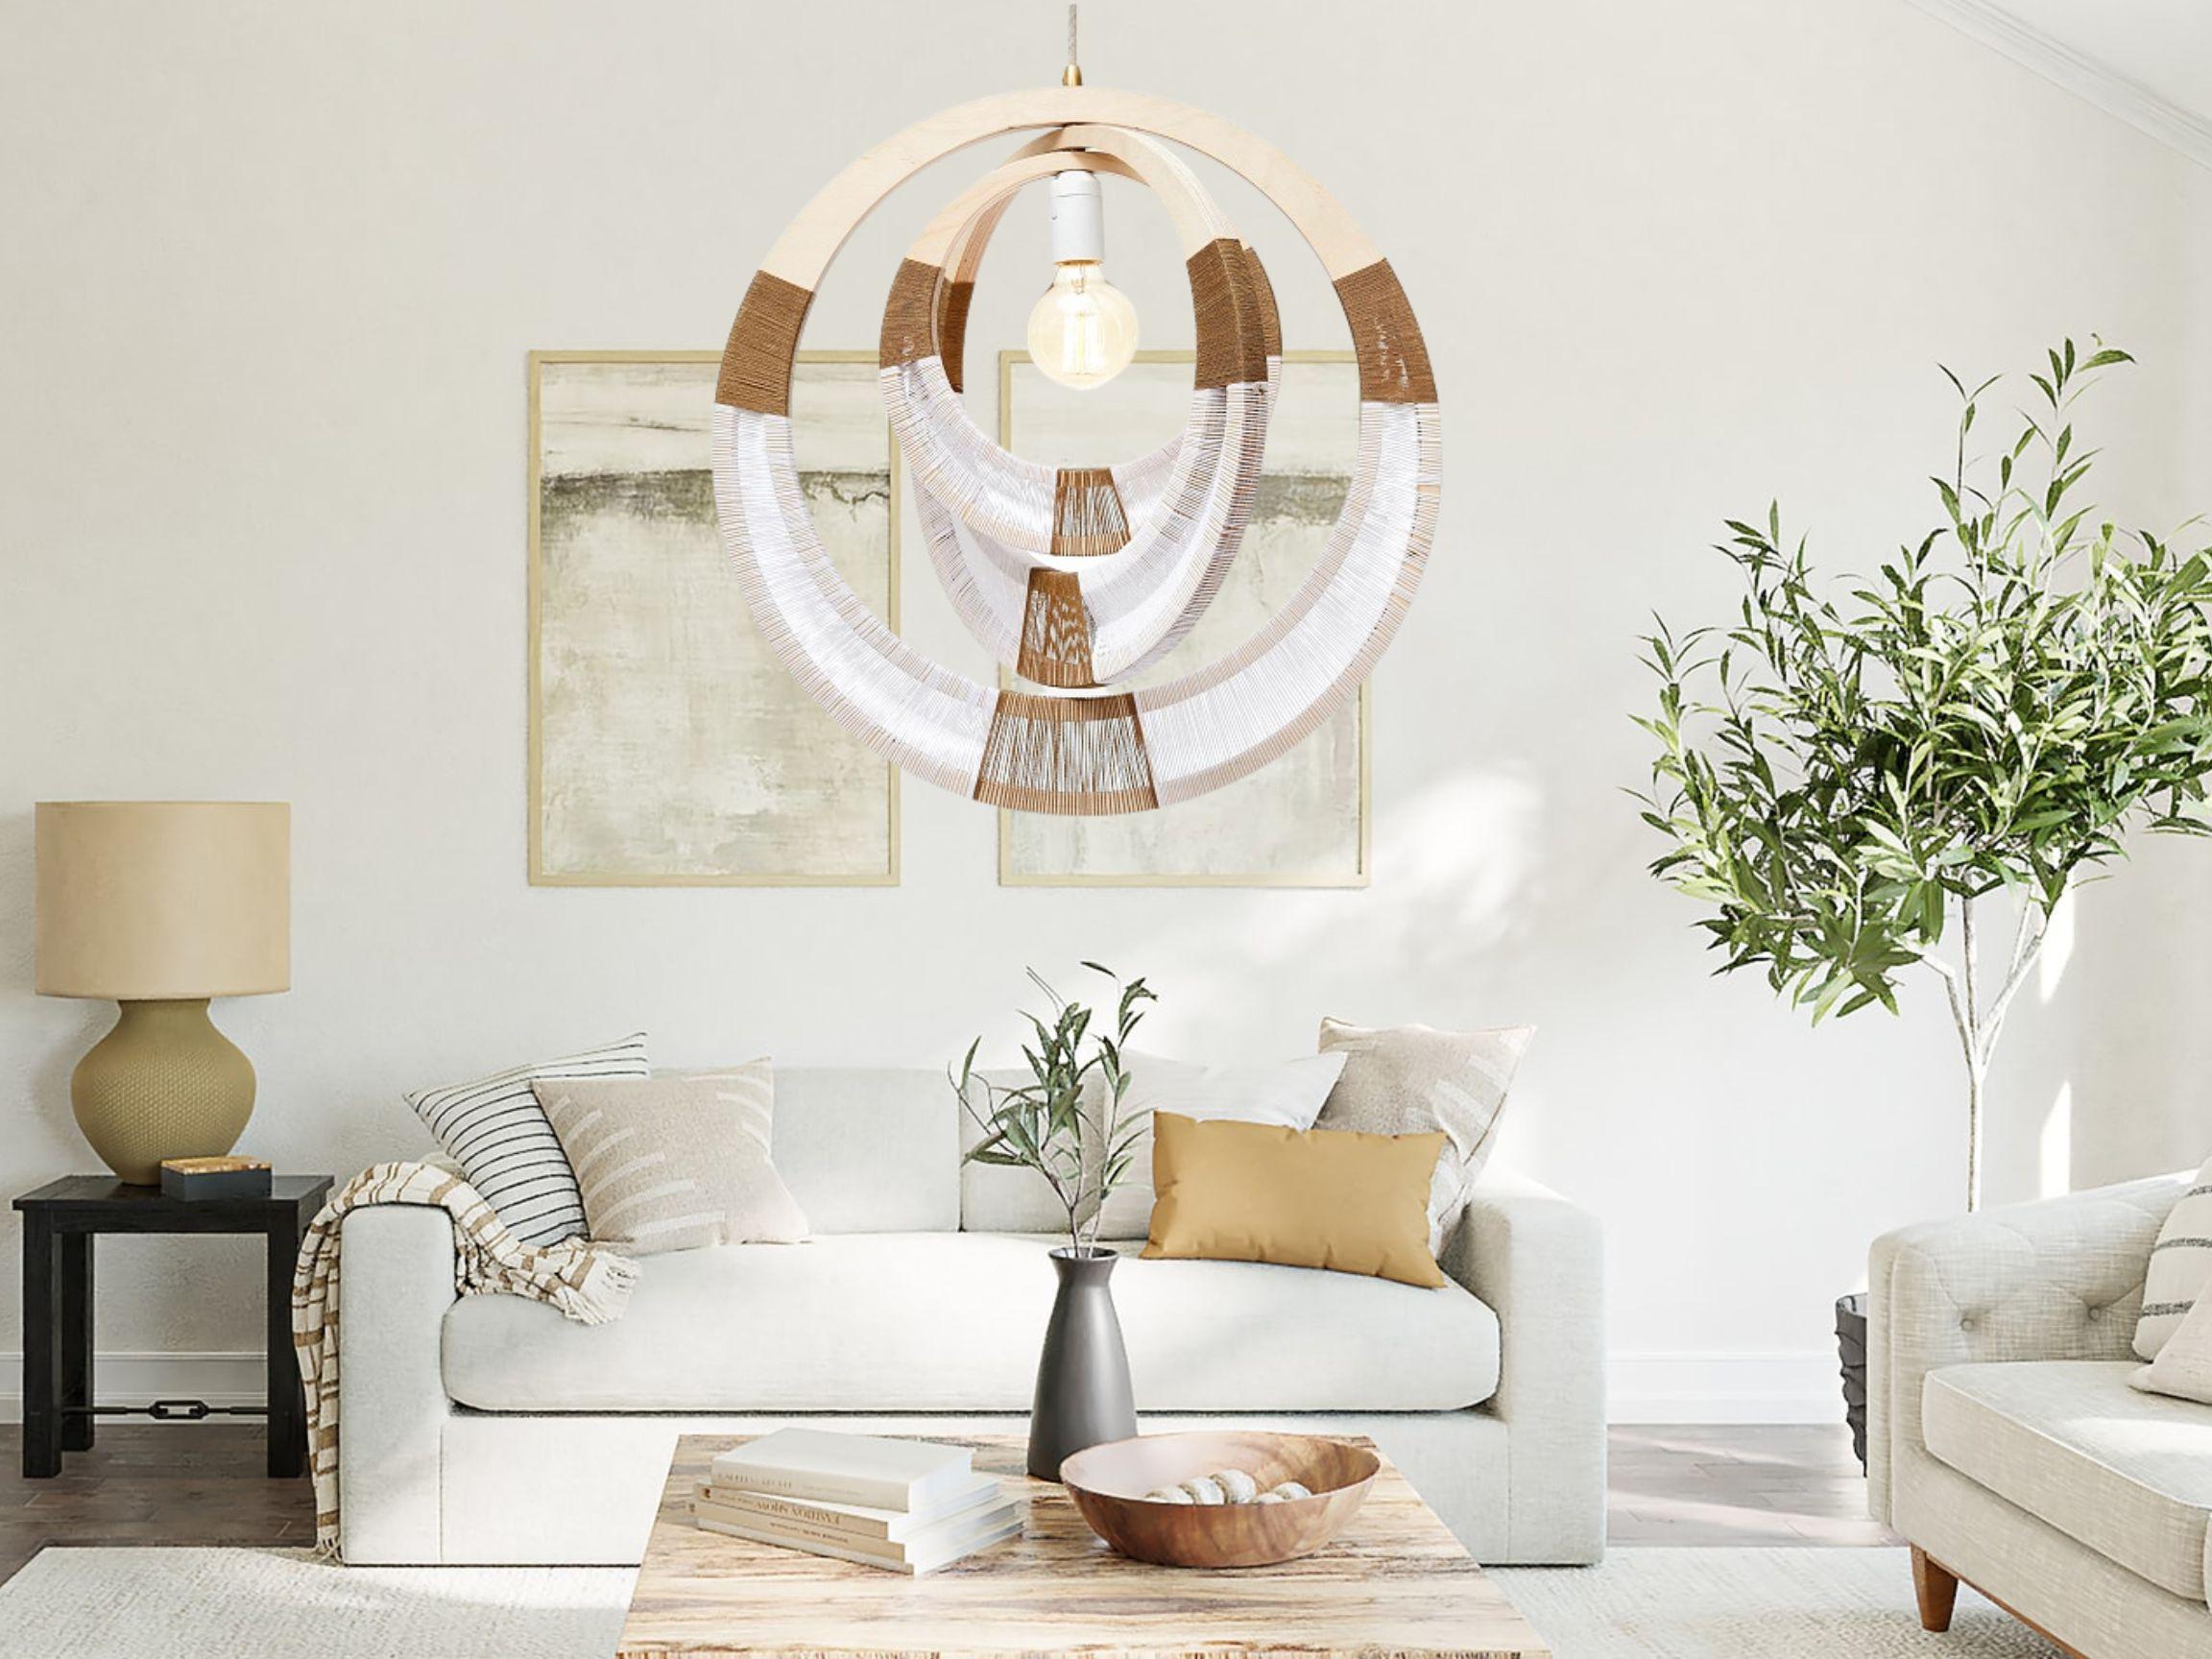 Illuminate your space with style and sophistication. This designer pendant light is the perfect statement piece for any room.

Its elegant and geometric shape through the use of wooden rings, is the perfect flair for that eclectic vibe!

The